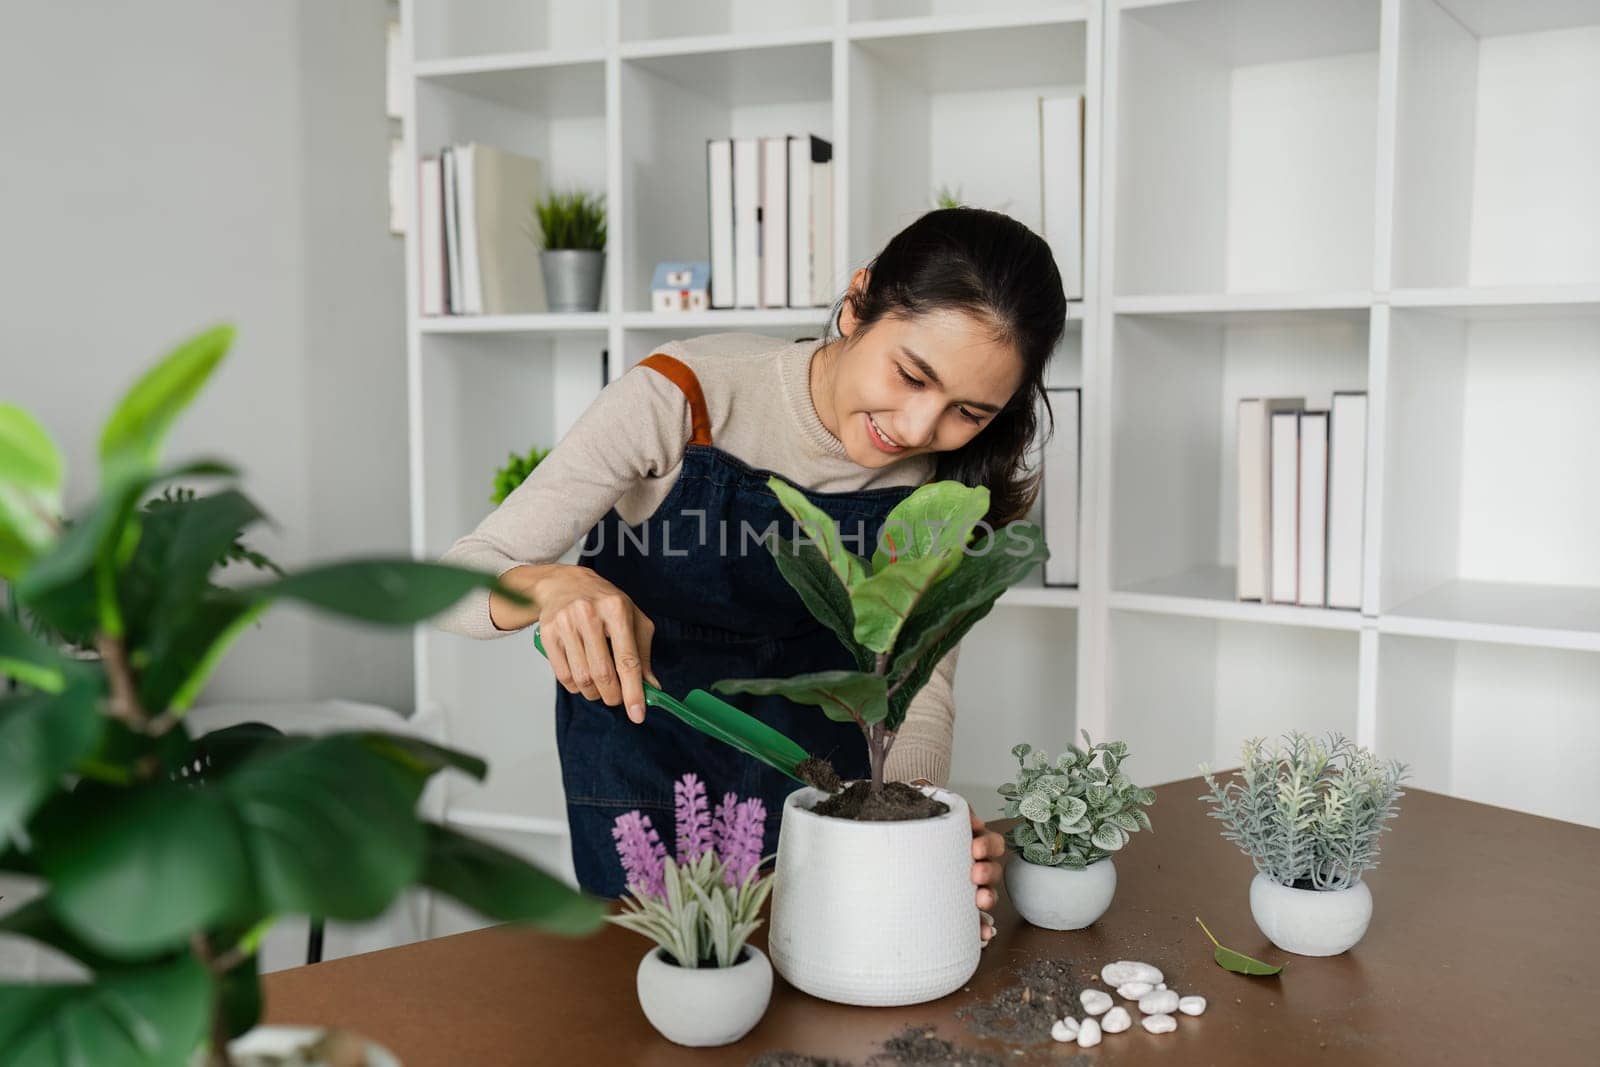 A woman is planting a plant in a white pot. The plant is surrounded by other plants in different pots